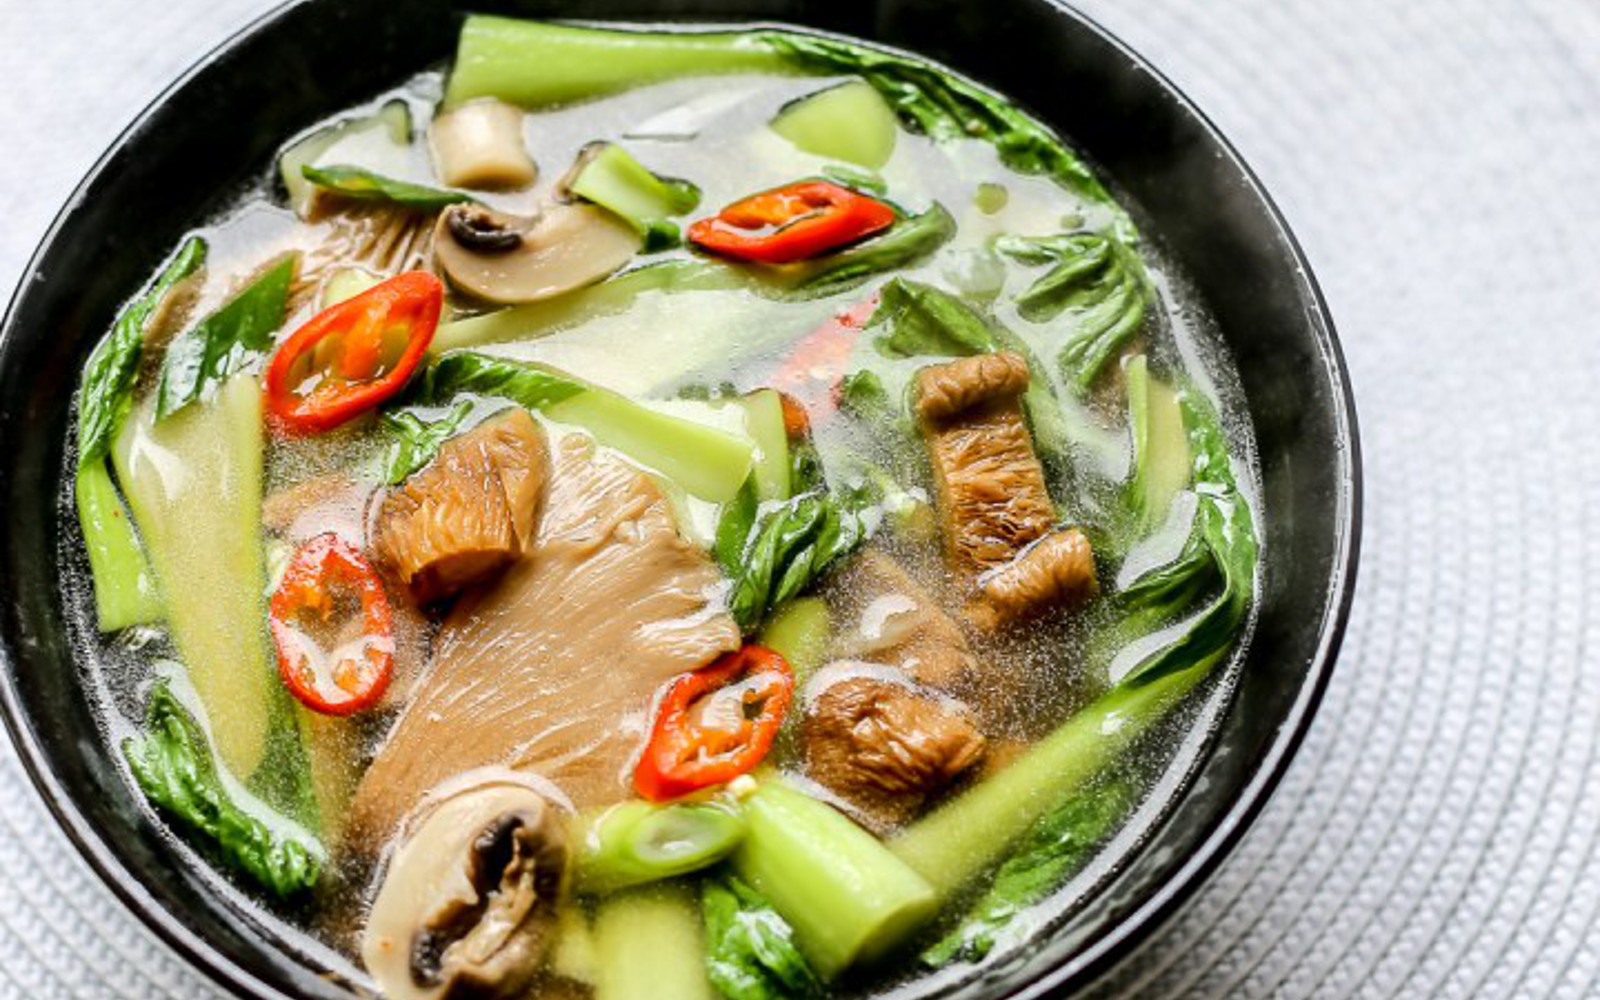 Hot and Sour Mushroom Soup With Bok Choy